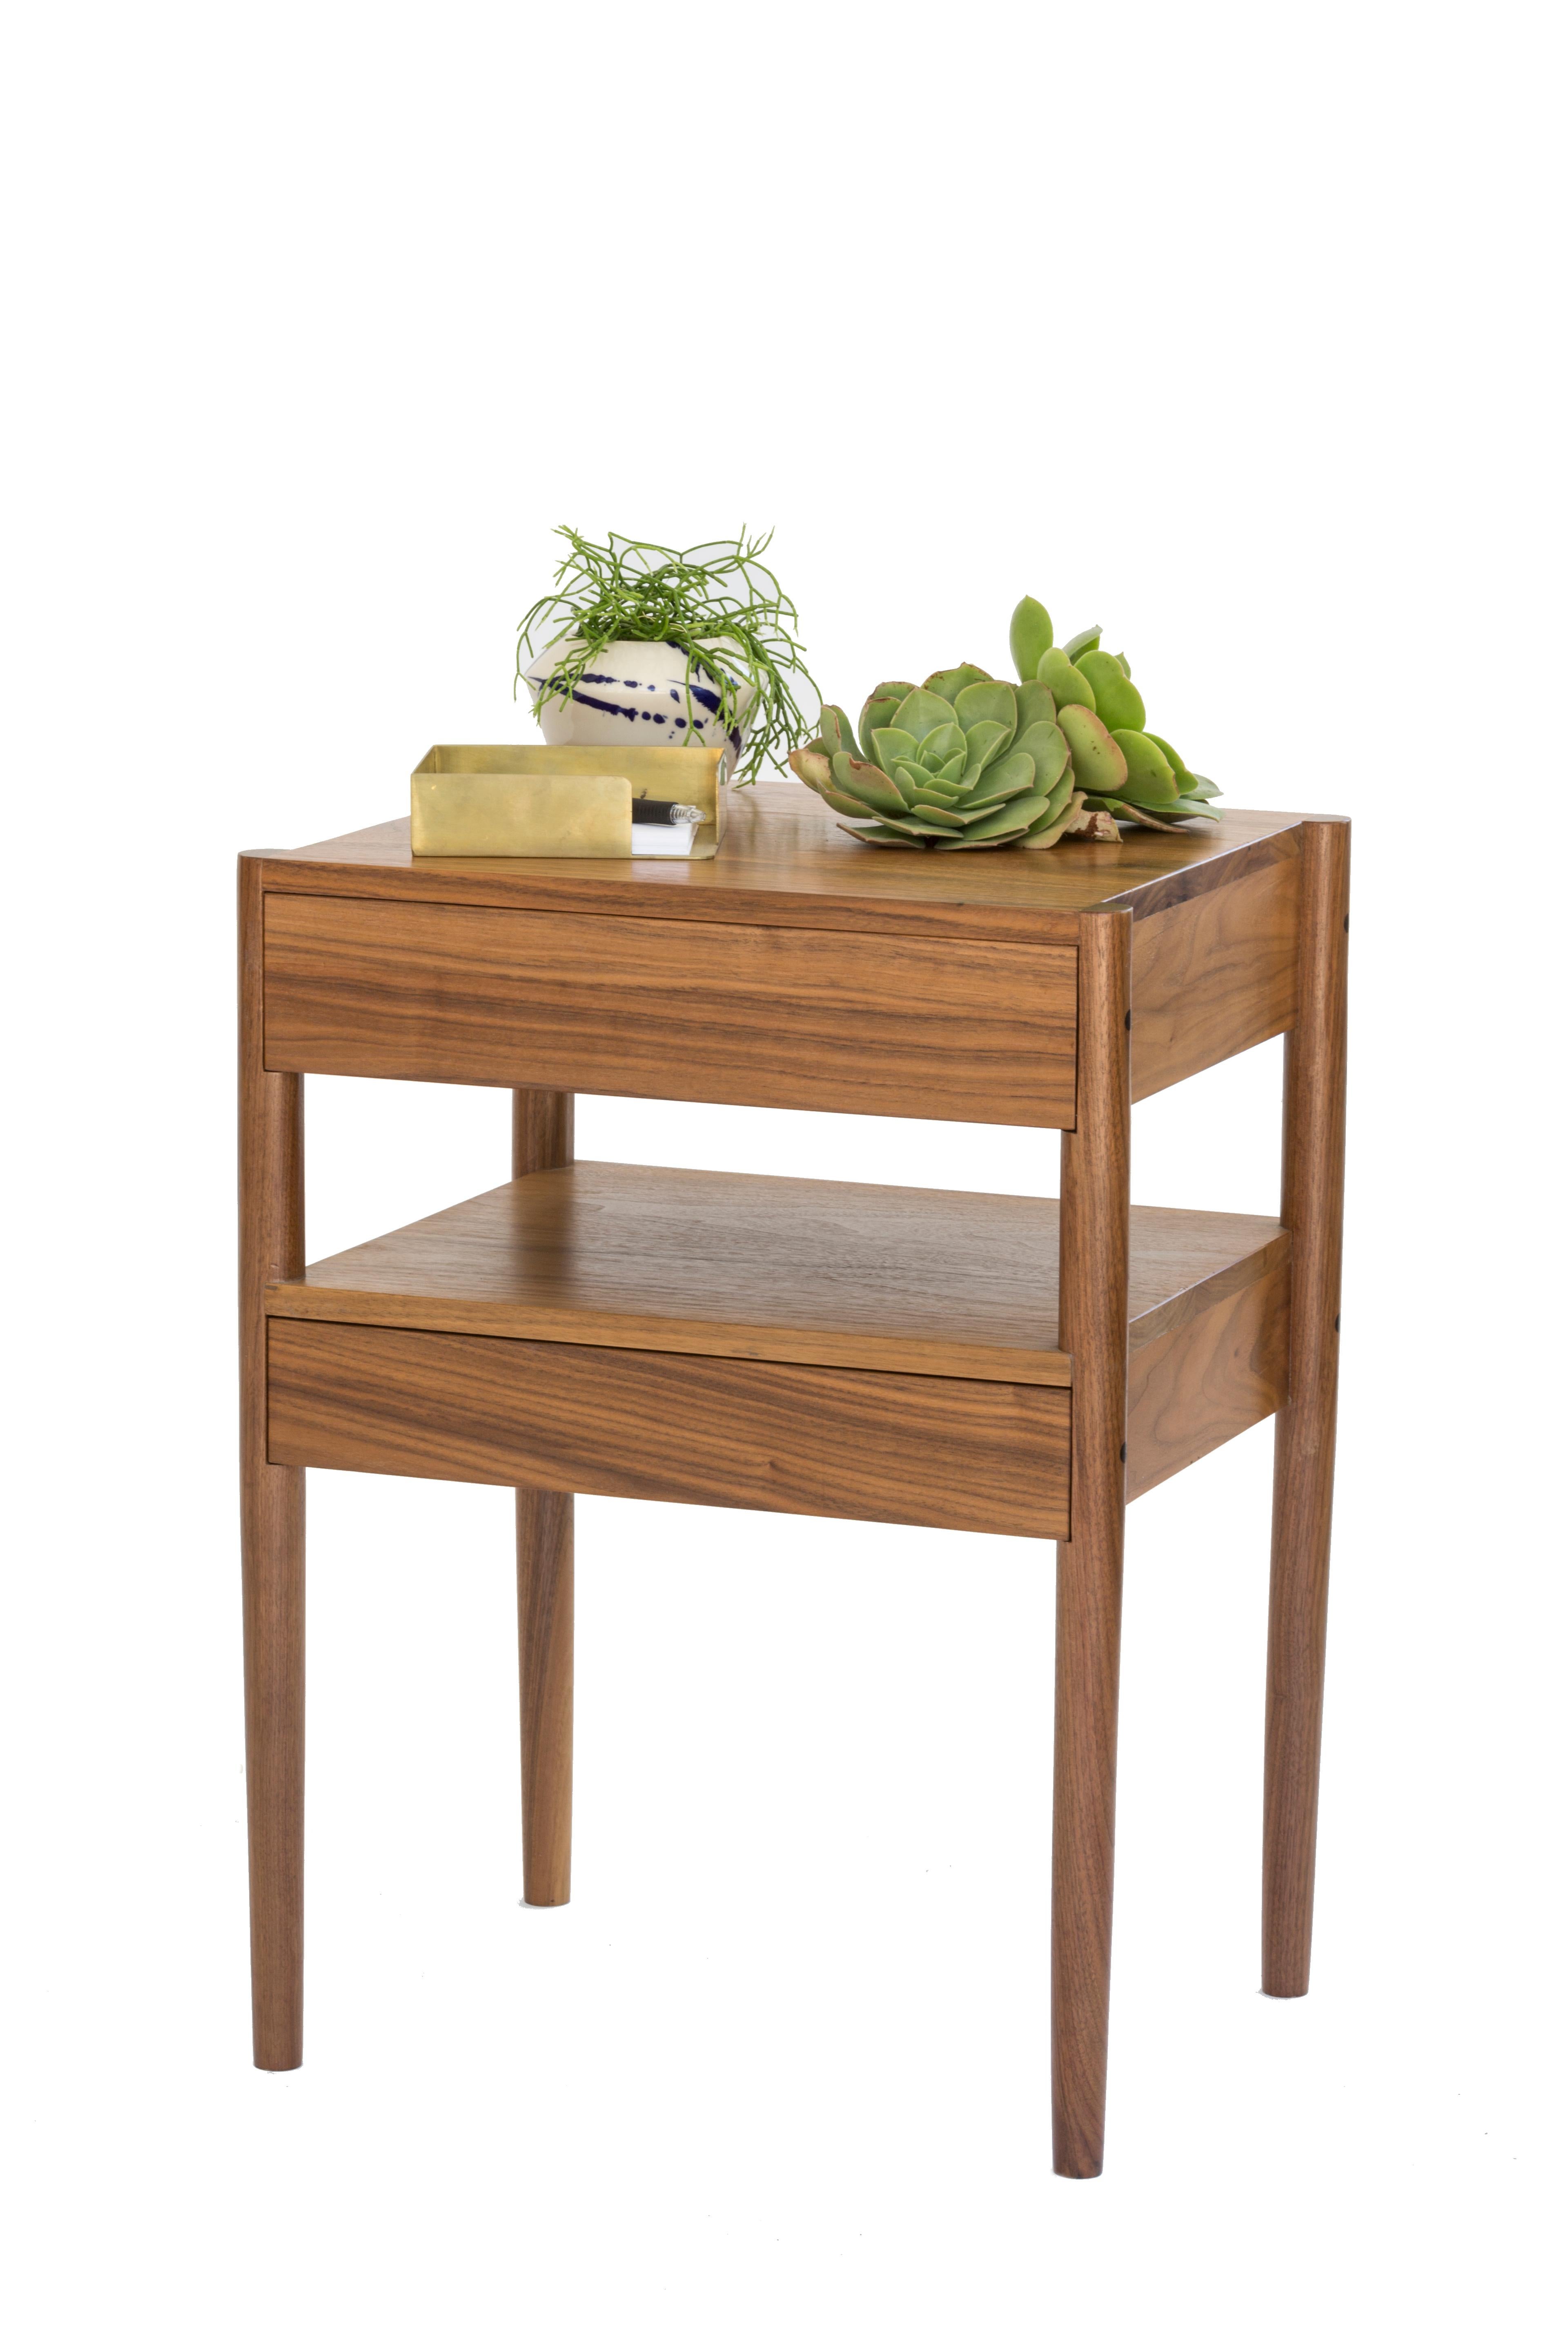 Open up its two floating slow closing drawers to stow away all your bedside essentials. This night stand is solid wood constructed, with turned legs, and hand-cut joints.

Wood options are natural oak, ebonized oak, or walnut. We can also make the